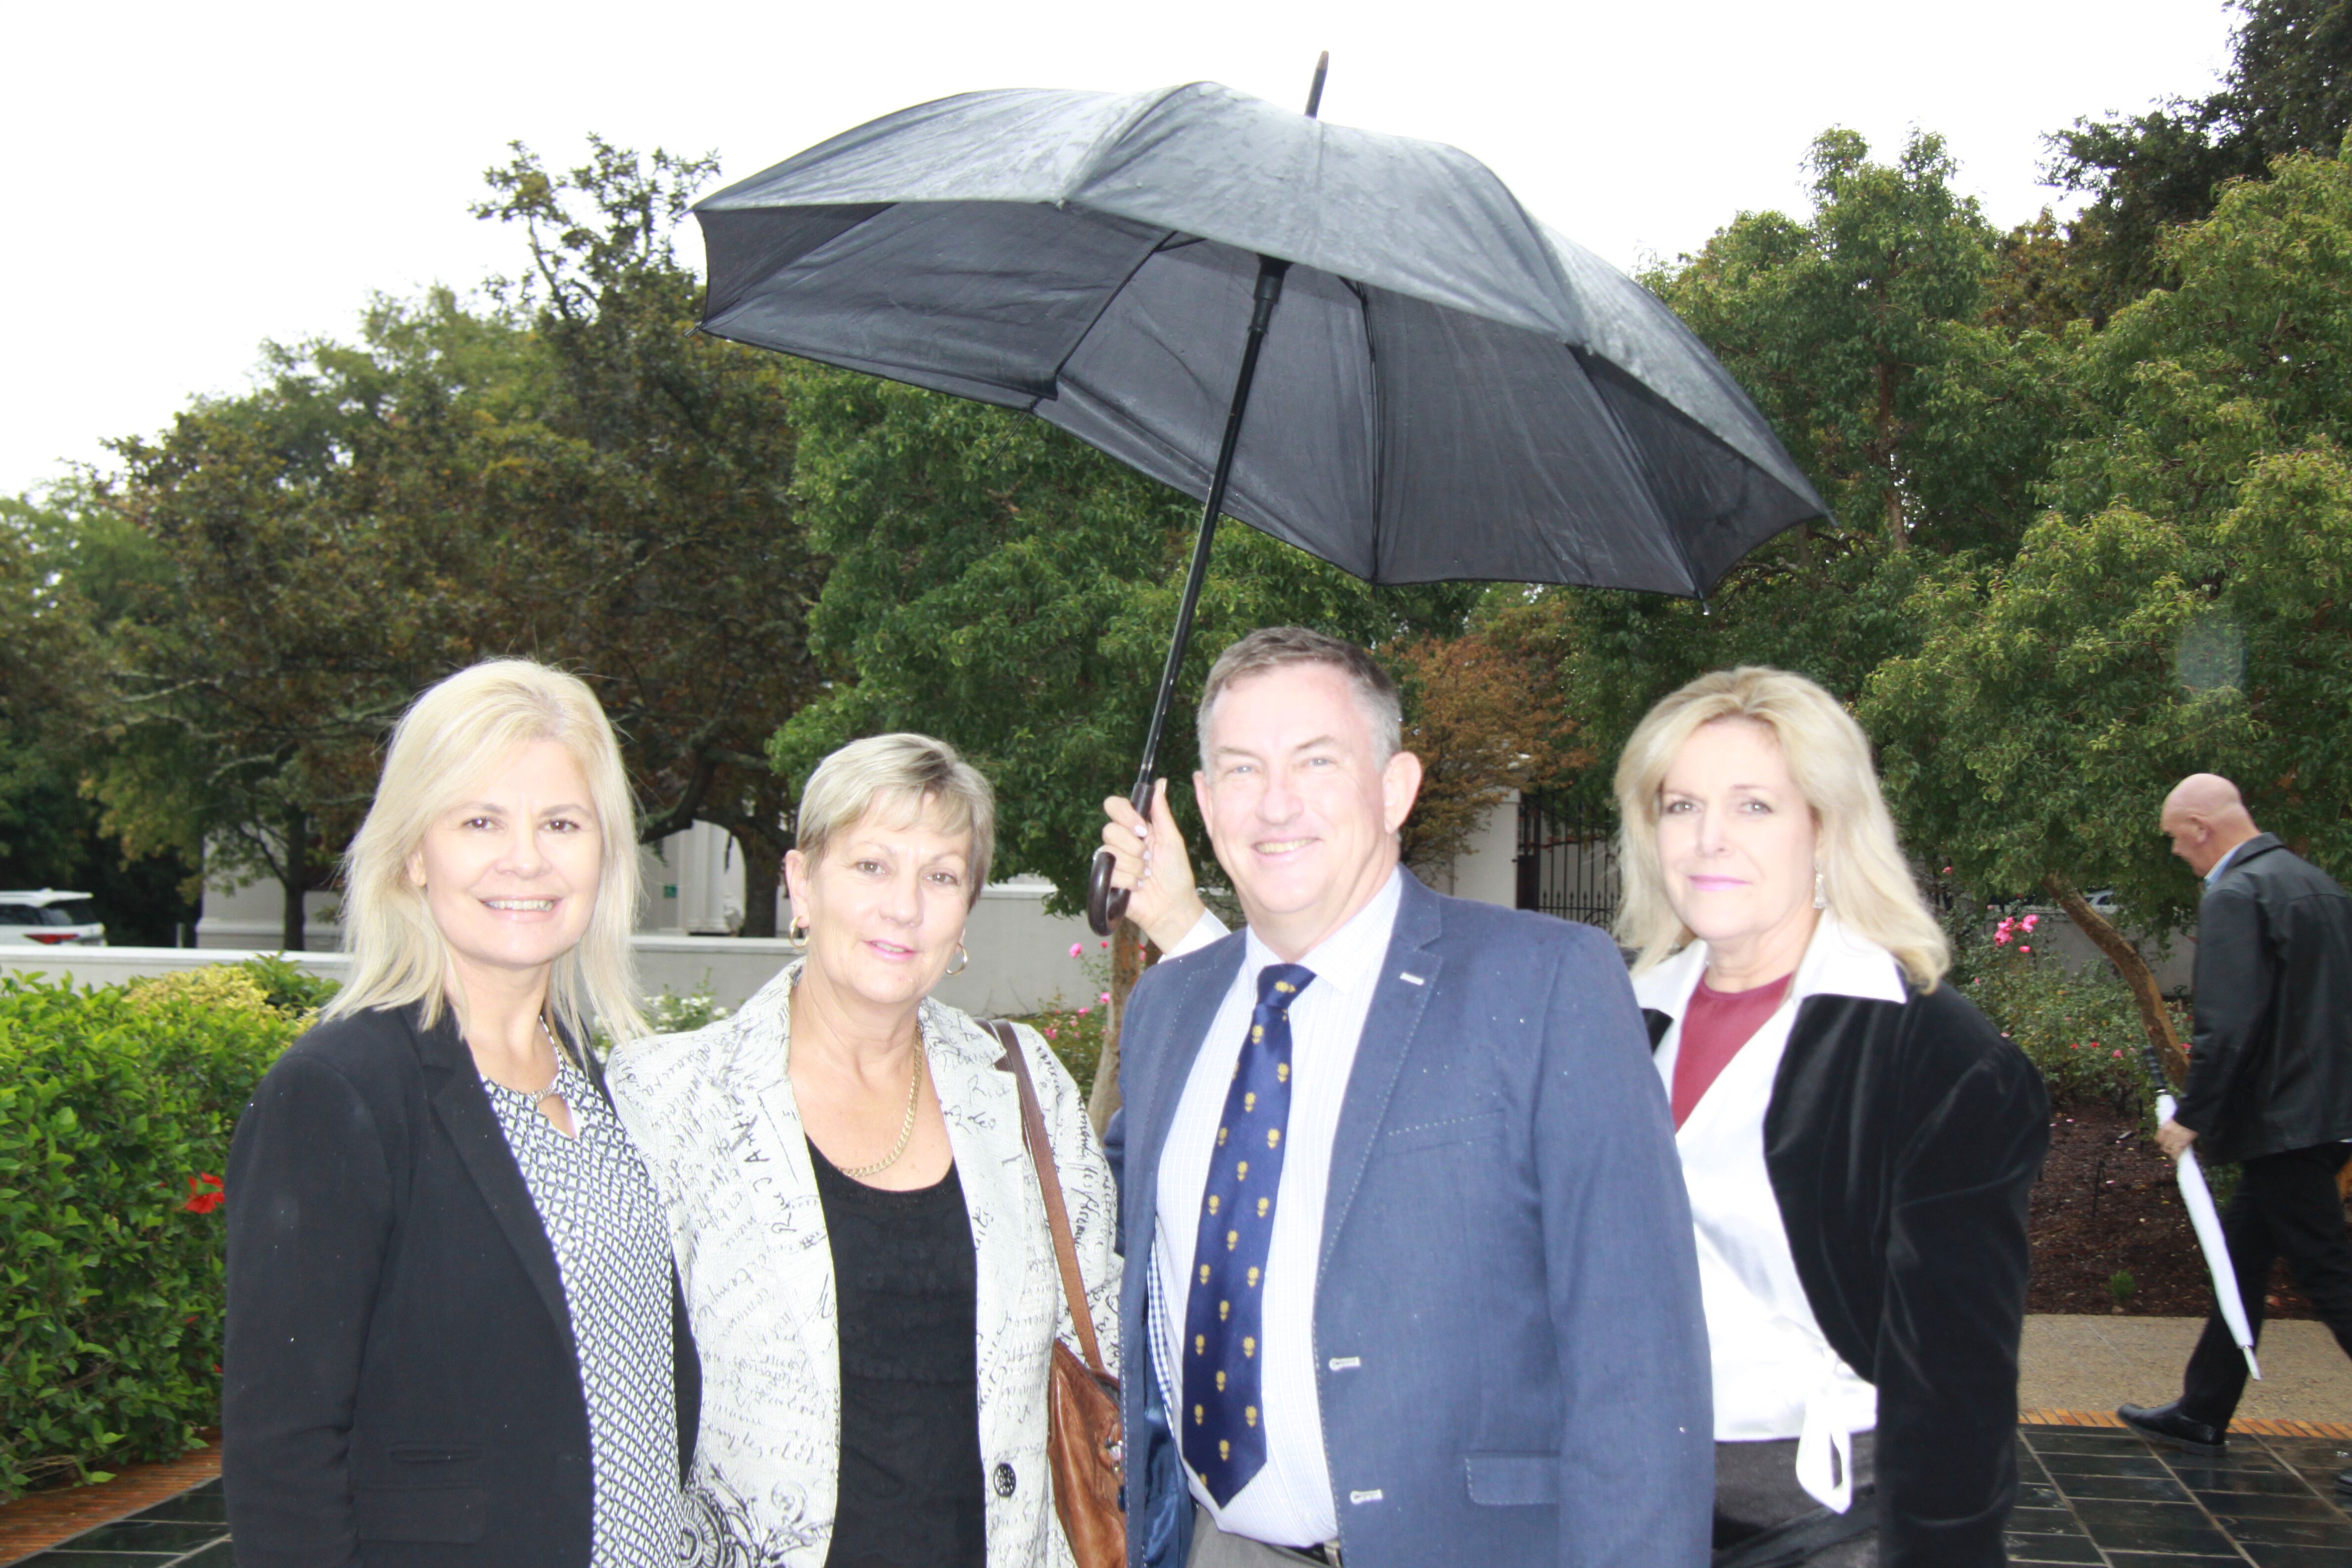 Ministers Shafer and Marais with Dr Kok and Museum Manager Anita van der Merwe at the launch in Franschhoek